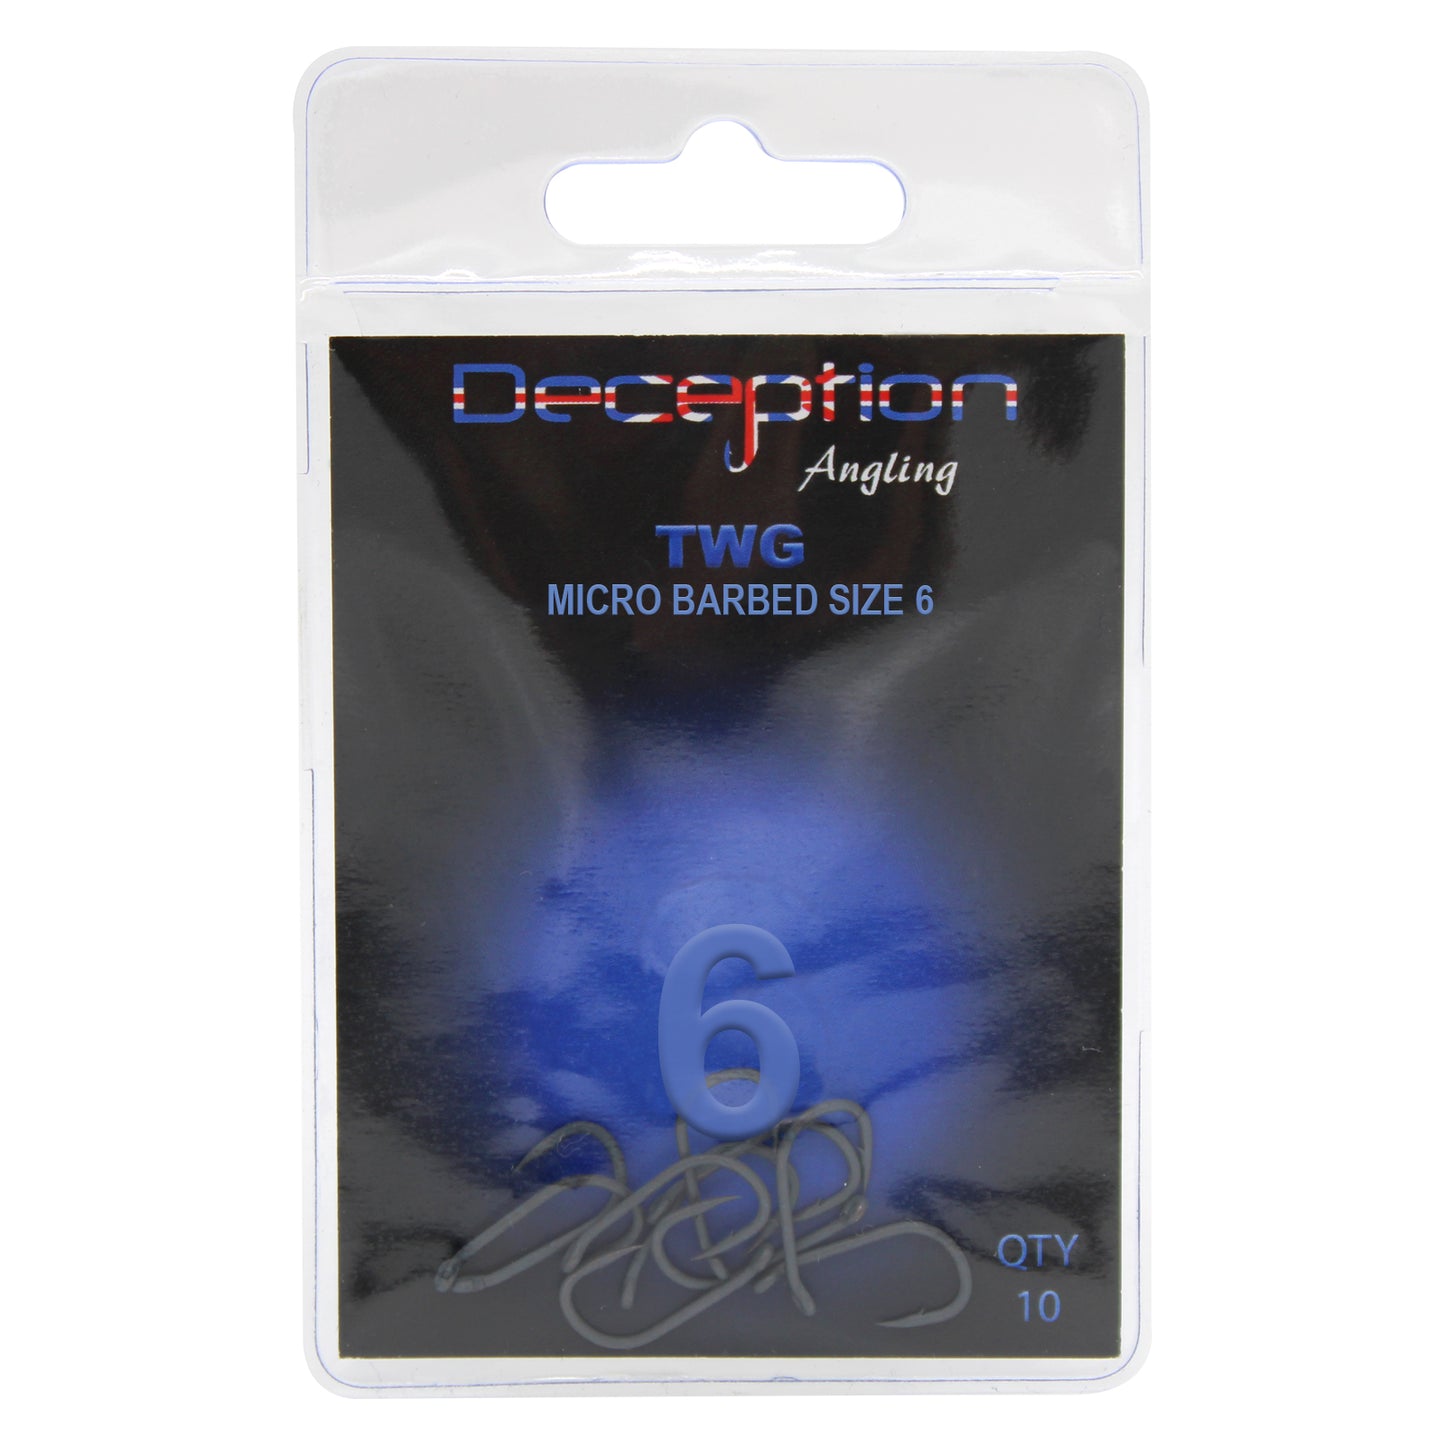 Deception Angling TWG Micro Barbed Fishing Hooks Pack of 10 Size 6